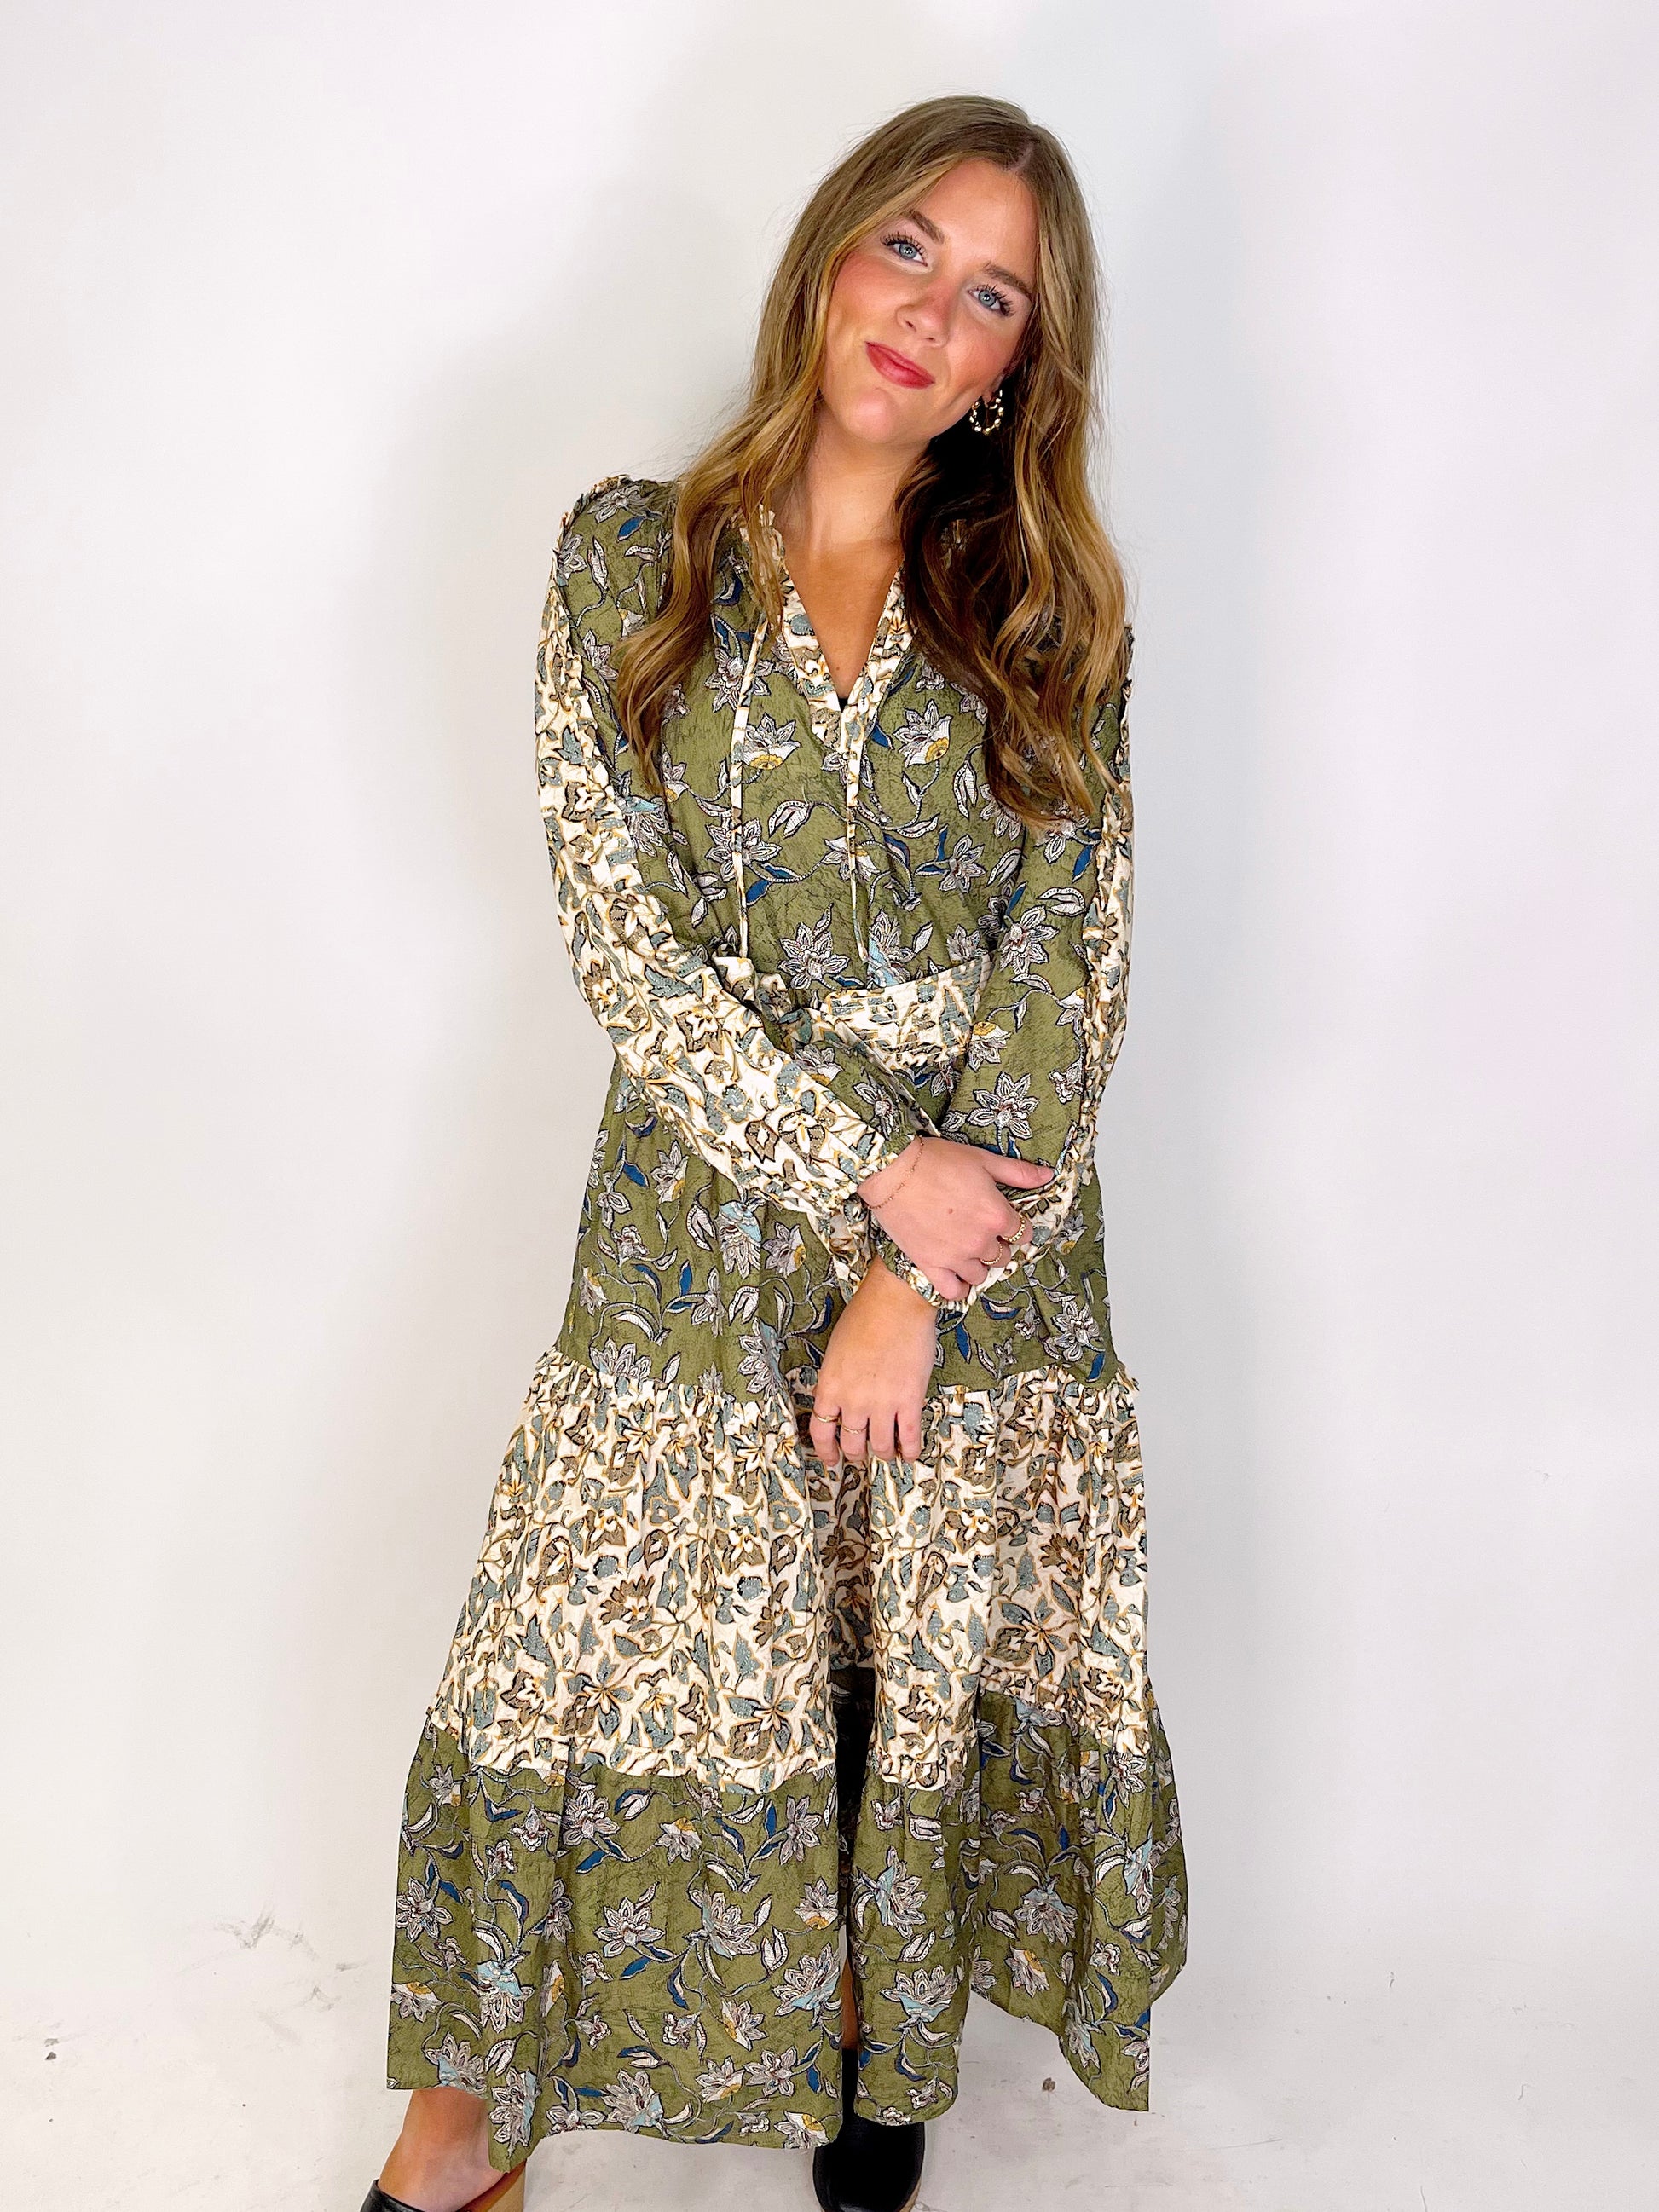 The Kailey Midi Dress-Midi Dress-See and Be Seen-The Village Shoppe, Women’s Fashion Boutique, Shop Online and In Store - Located in Muscle Shoals, AL.